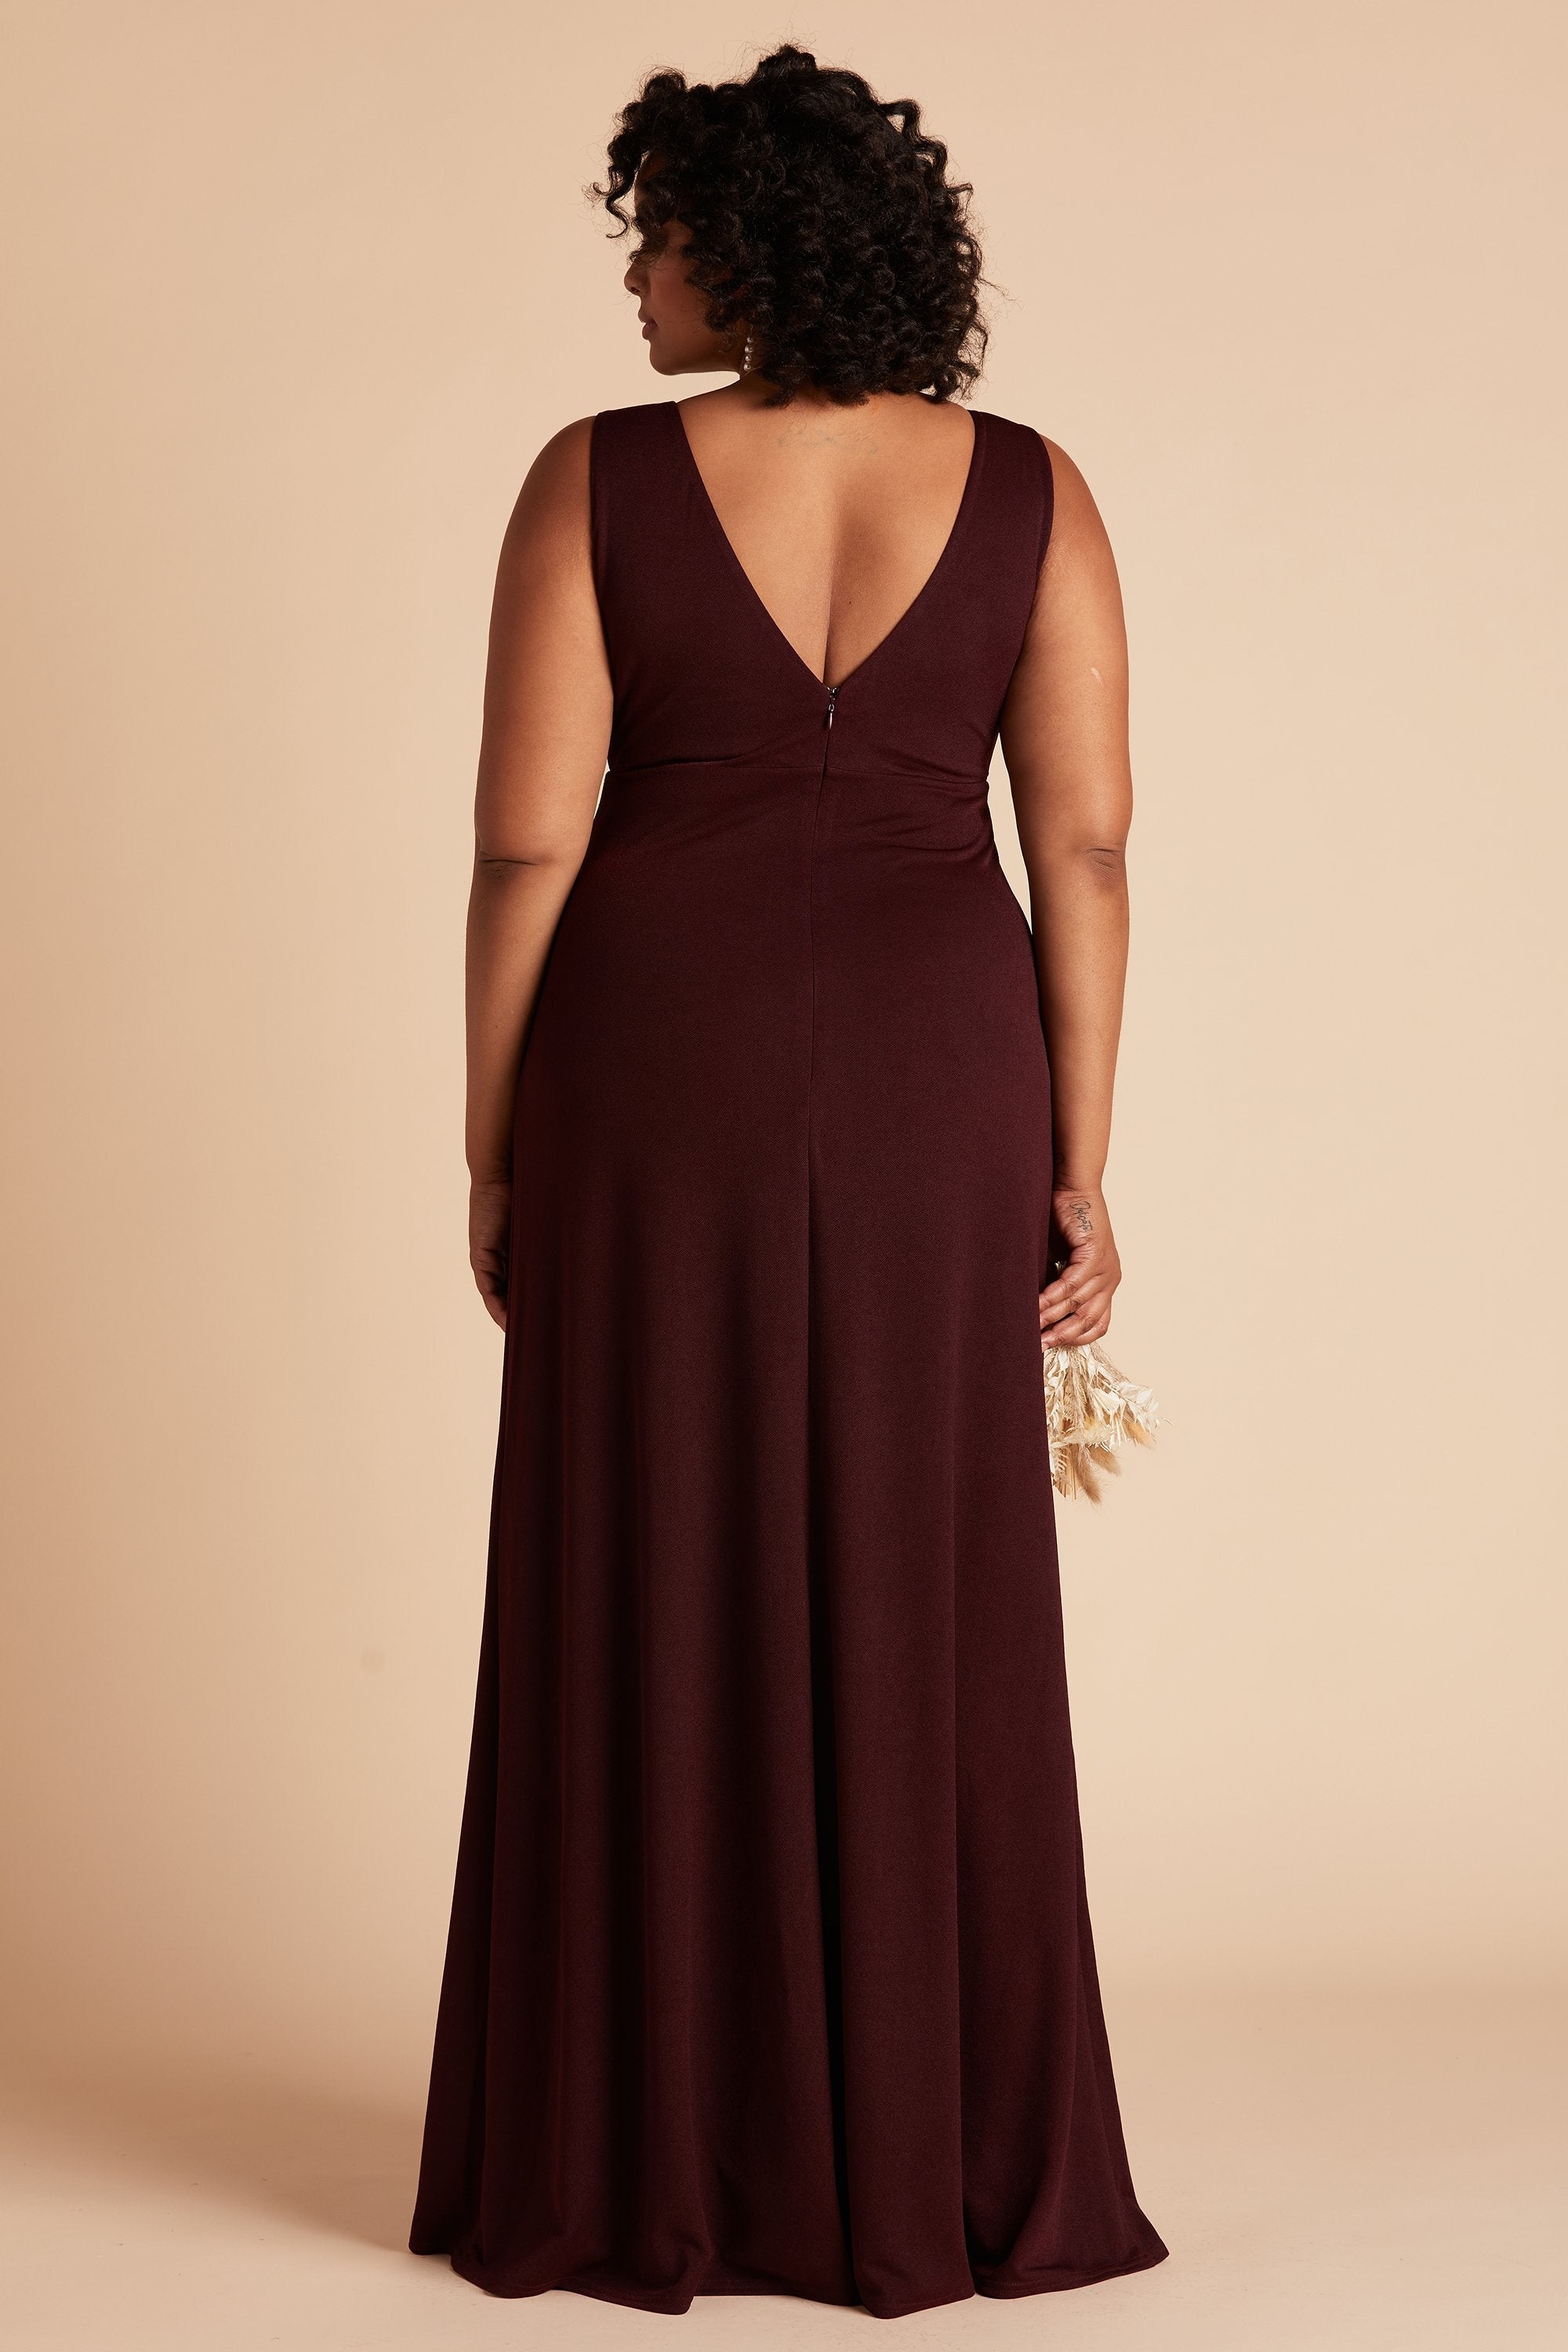 Shamin plus size bridesmaid dress in cabernet burgundy crepe by Birdy Grey, back view